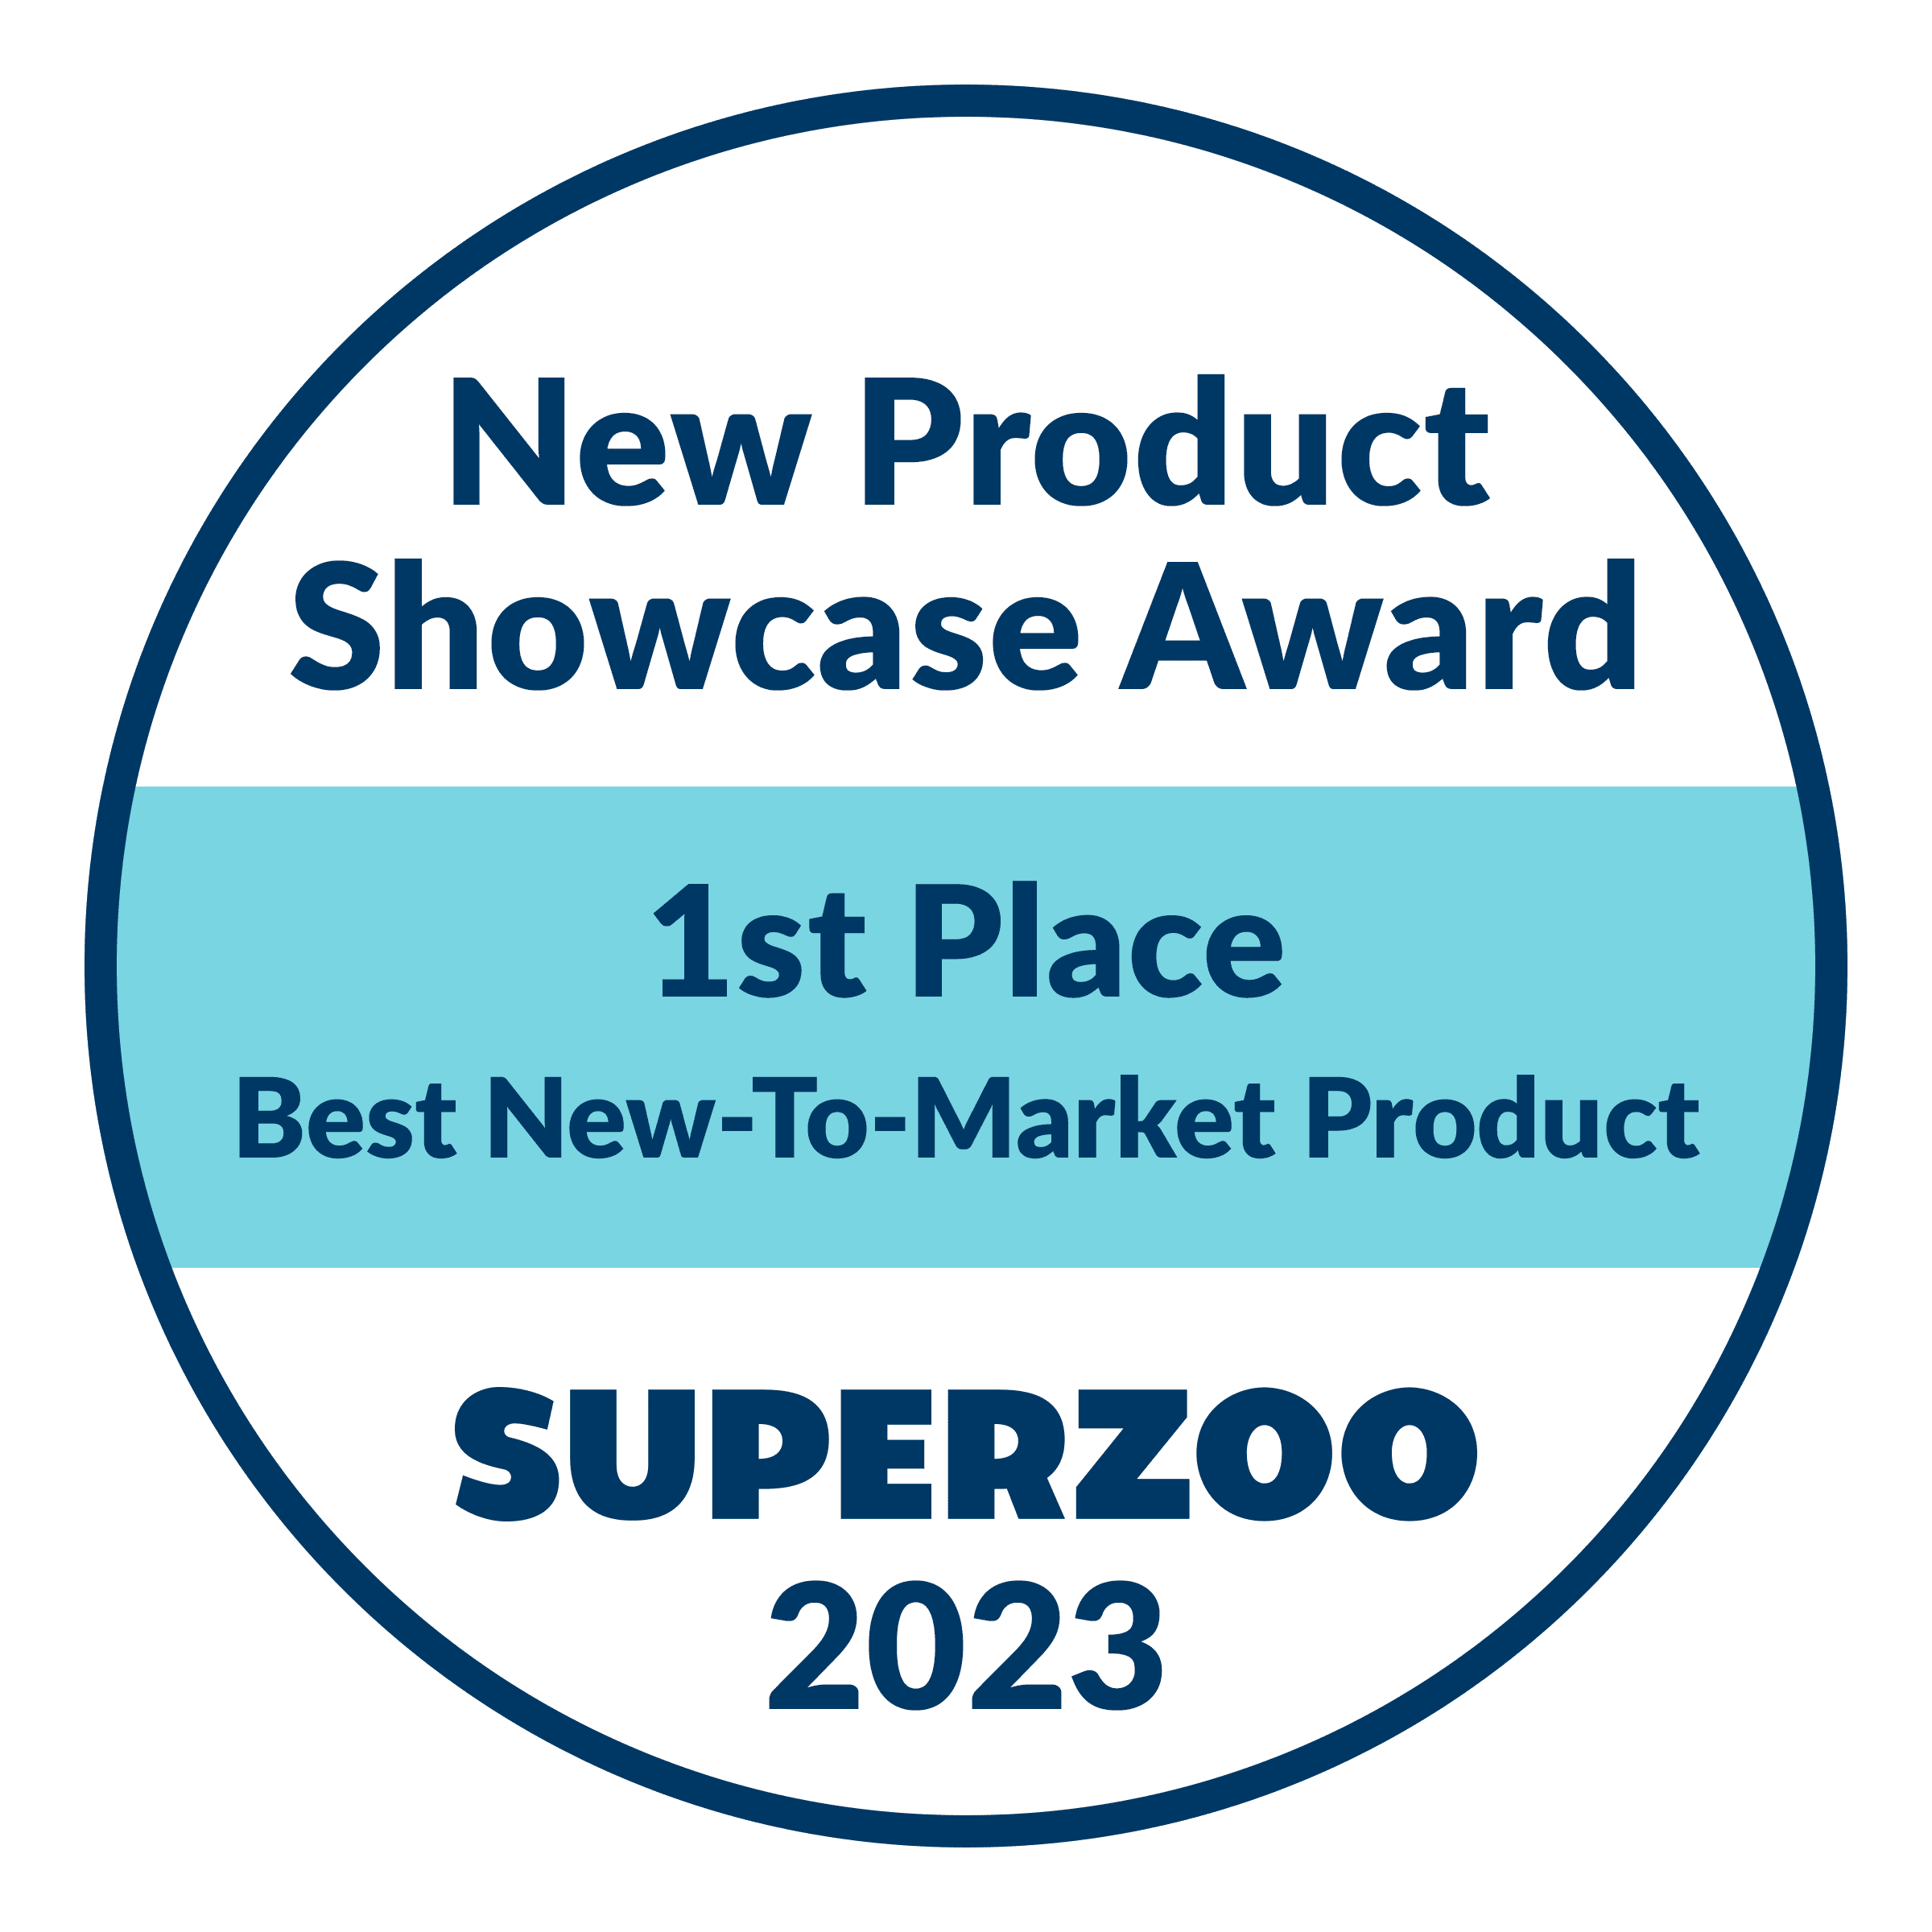 Best Overall - SuperZoo 2023